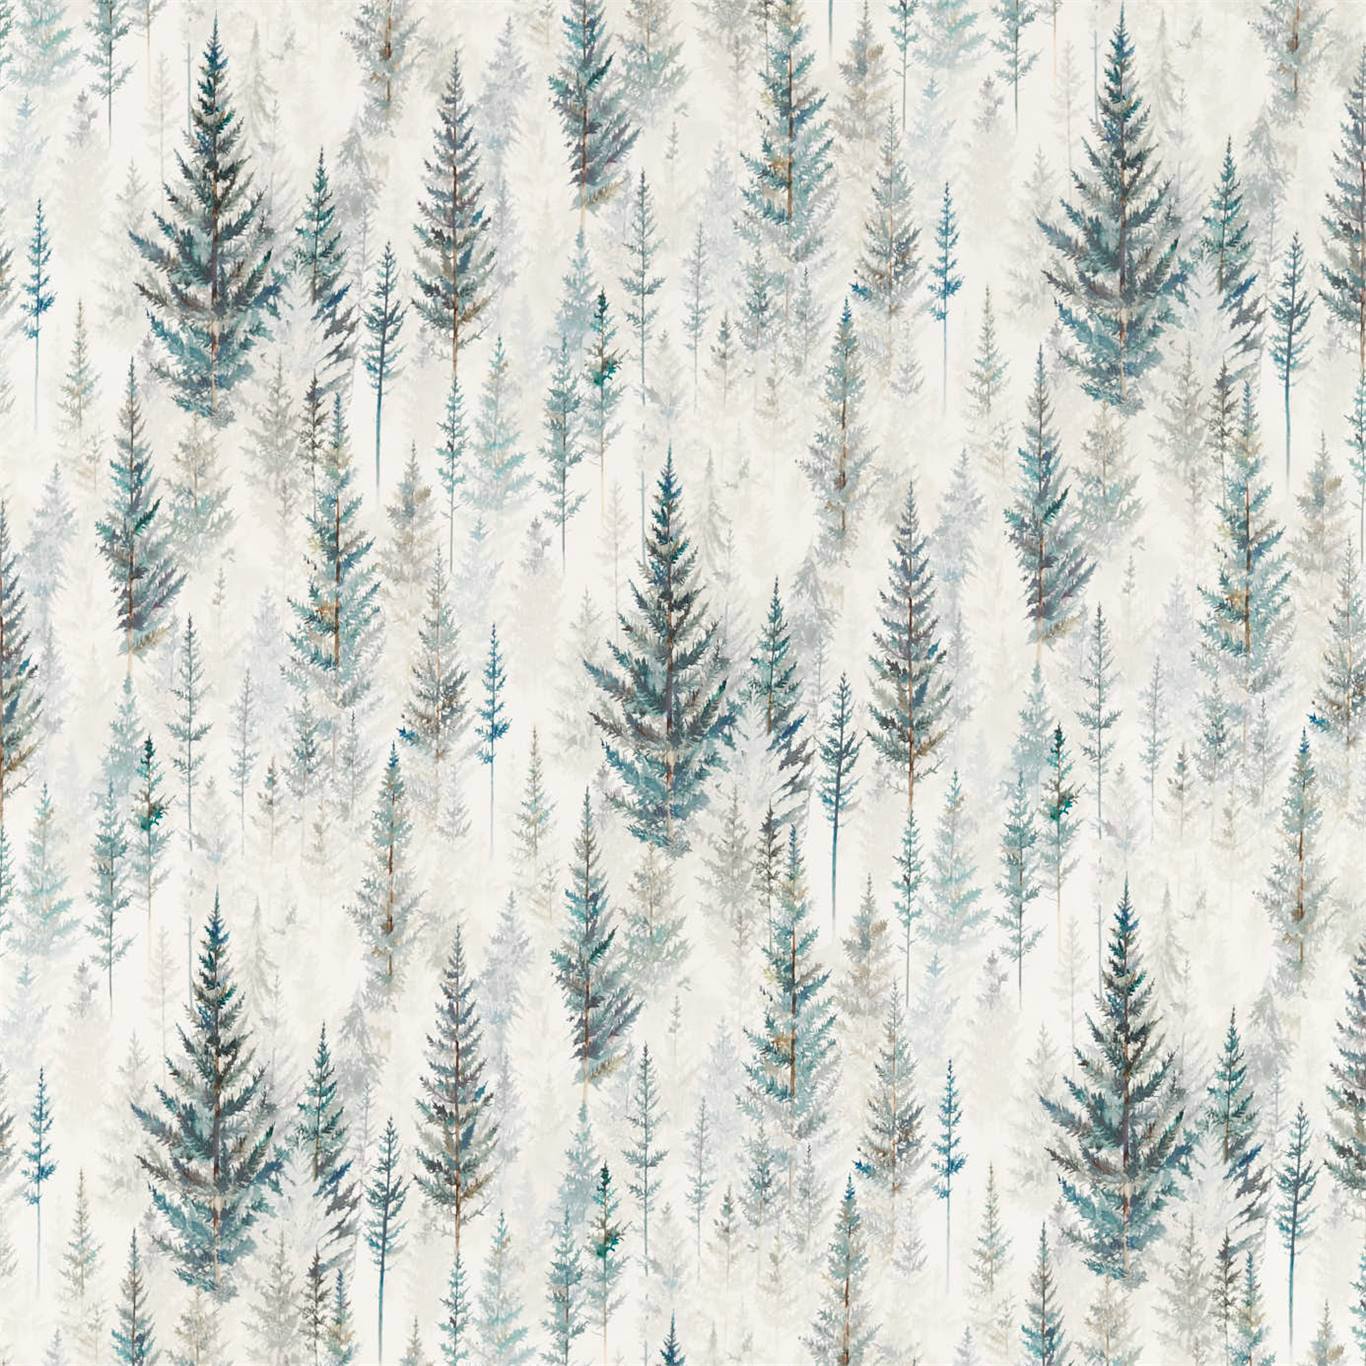 Juniper Pine Pine Forest Fabric by SAN